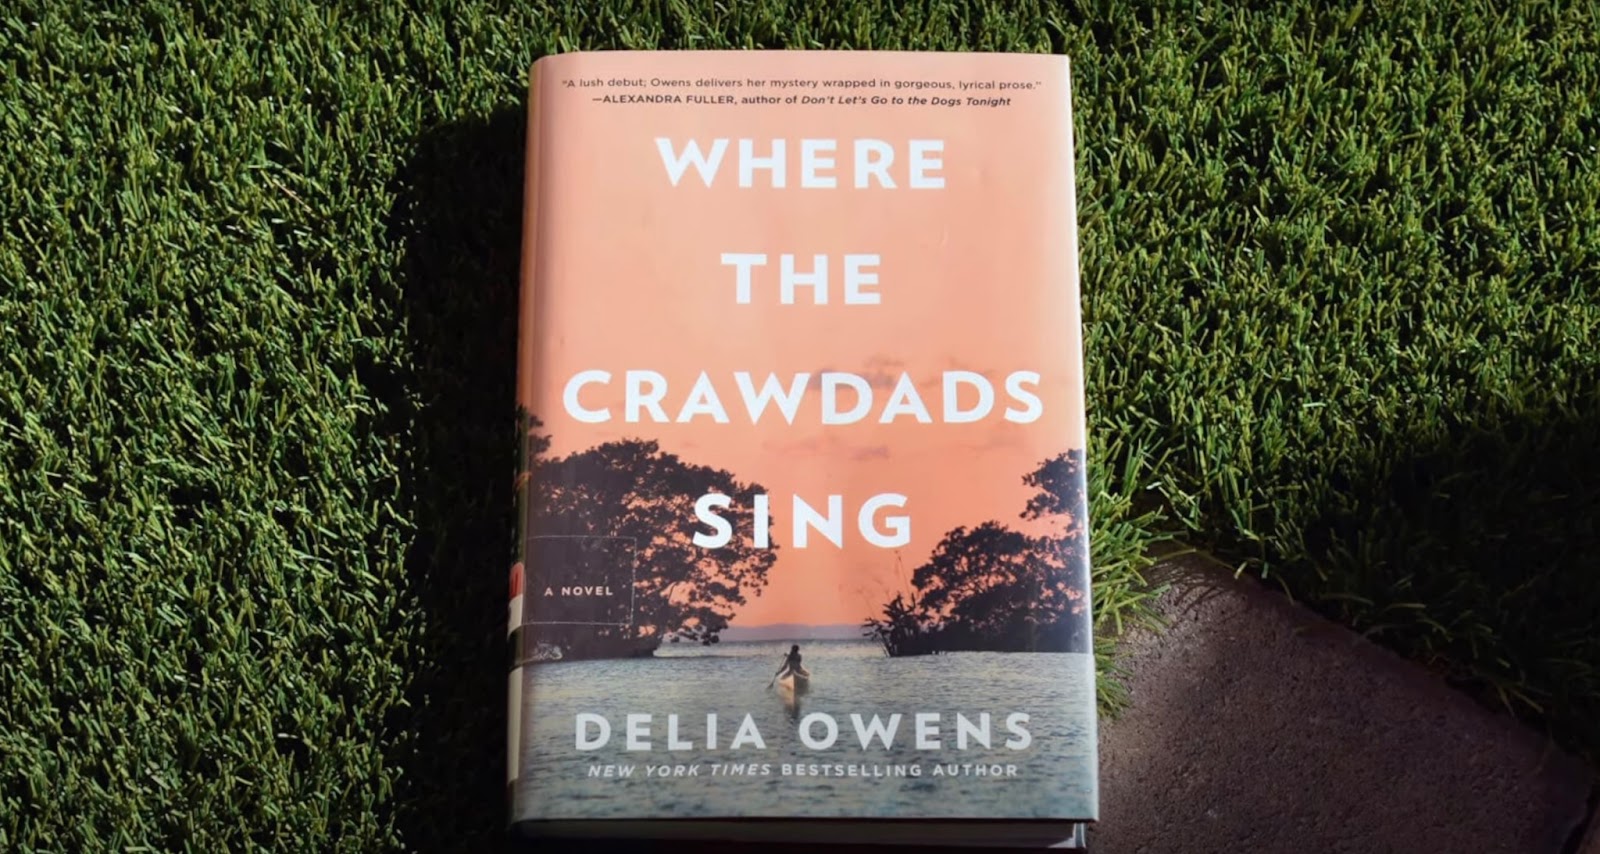 Comparing “Where the Crawdads Sing”: Book vs. Movie